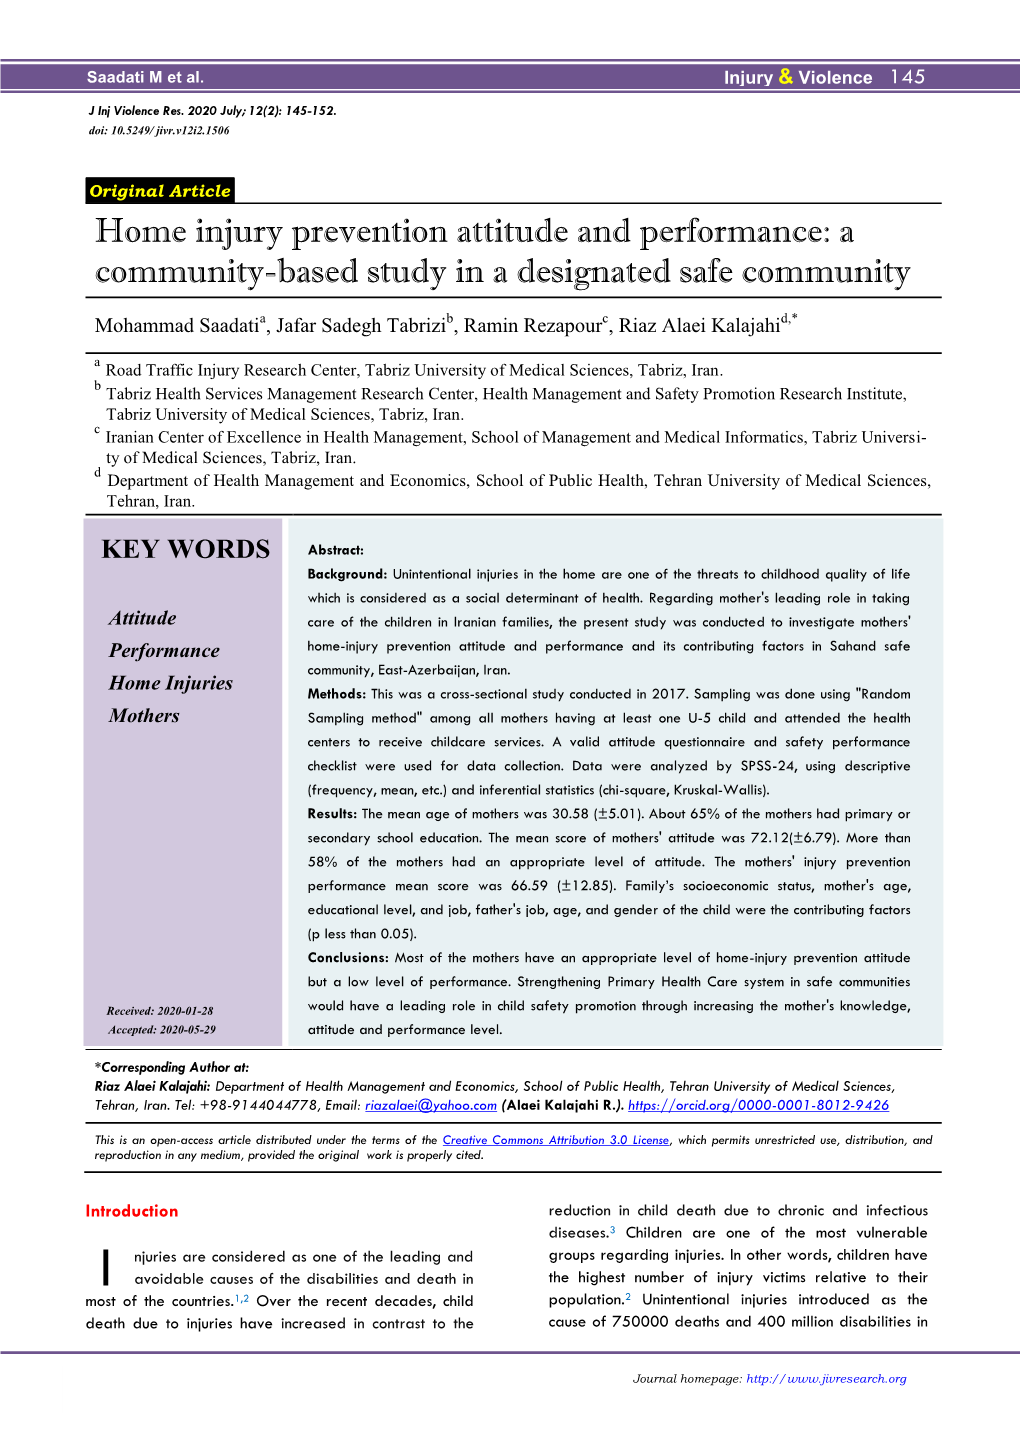 Home Injury Prevention Attitude and Performance: a Community-Based Study in a Designated Safe Community